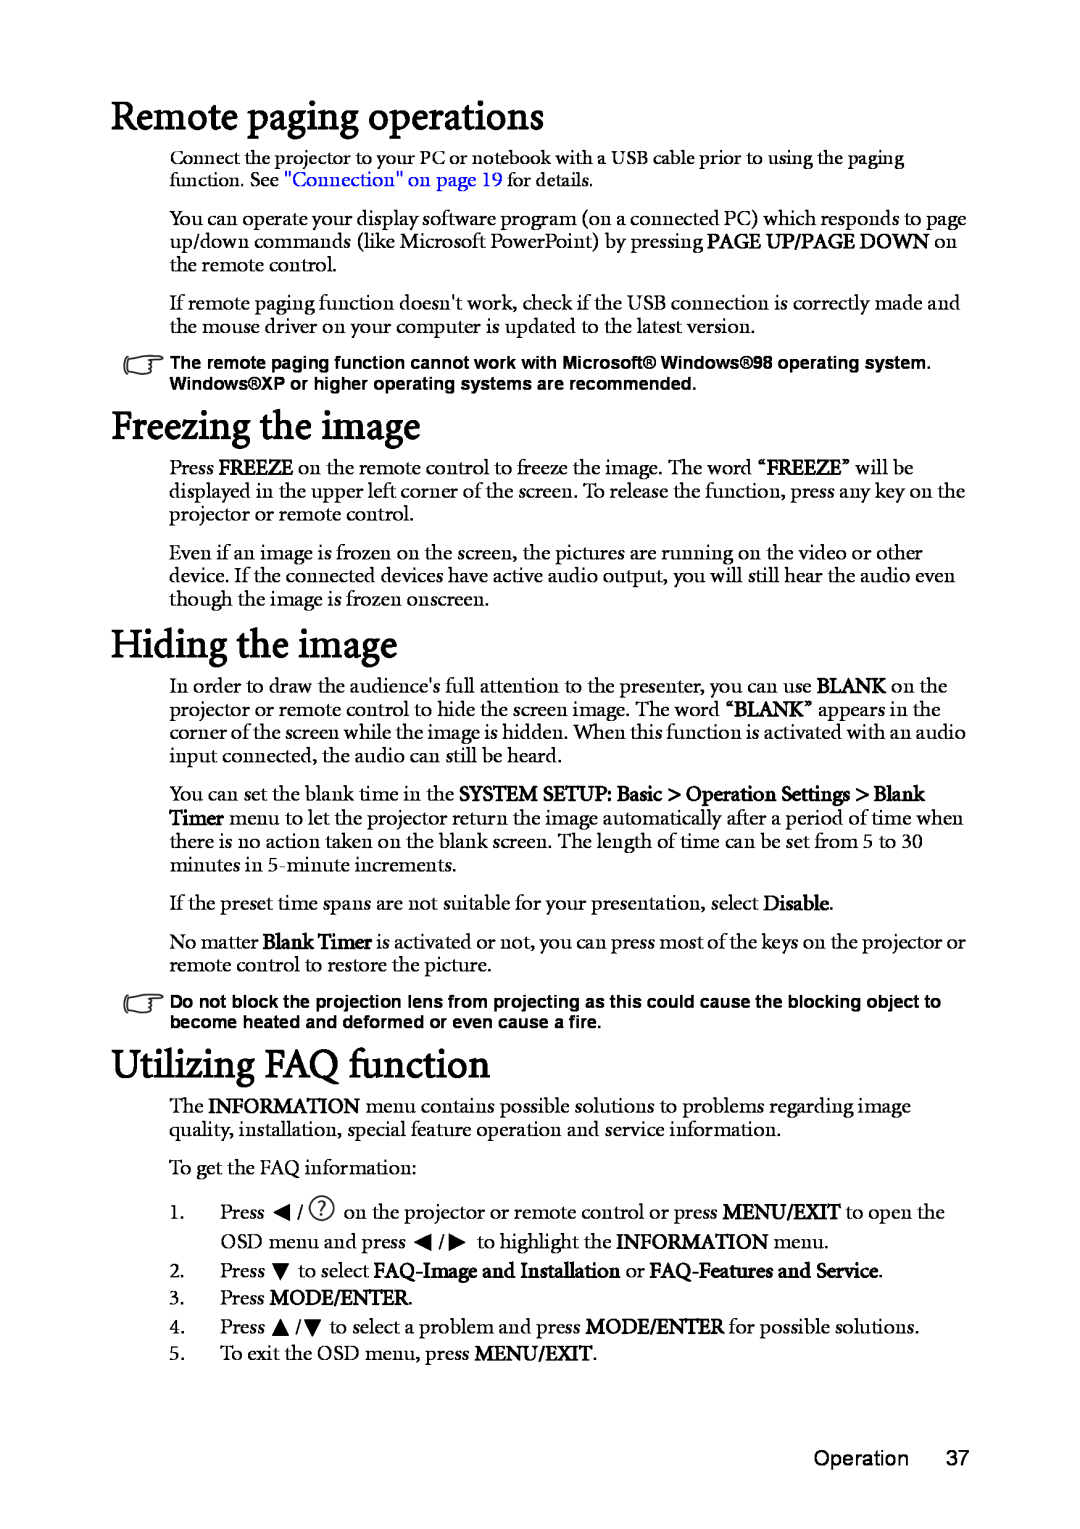 BenQ MX812ST, MW811ST user manual Remote paging operations, Freezing the image, Hiding the image, Utilizing FAQ function 